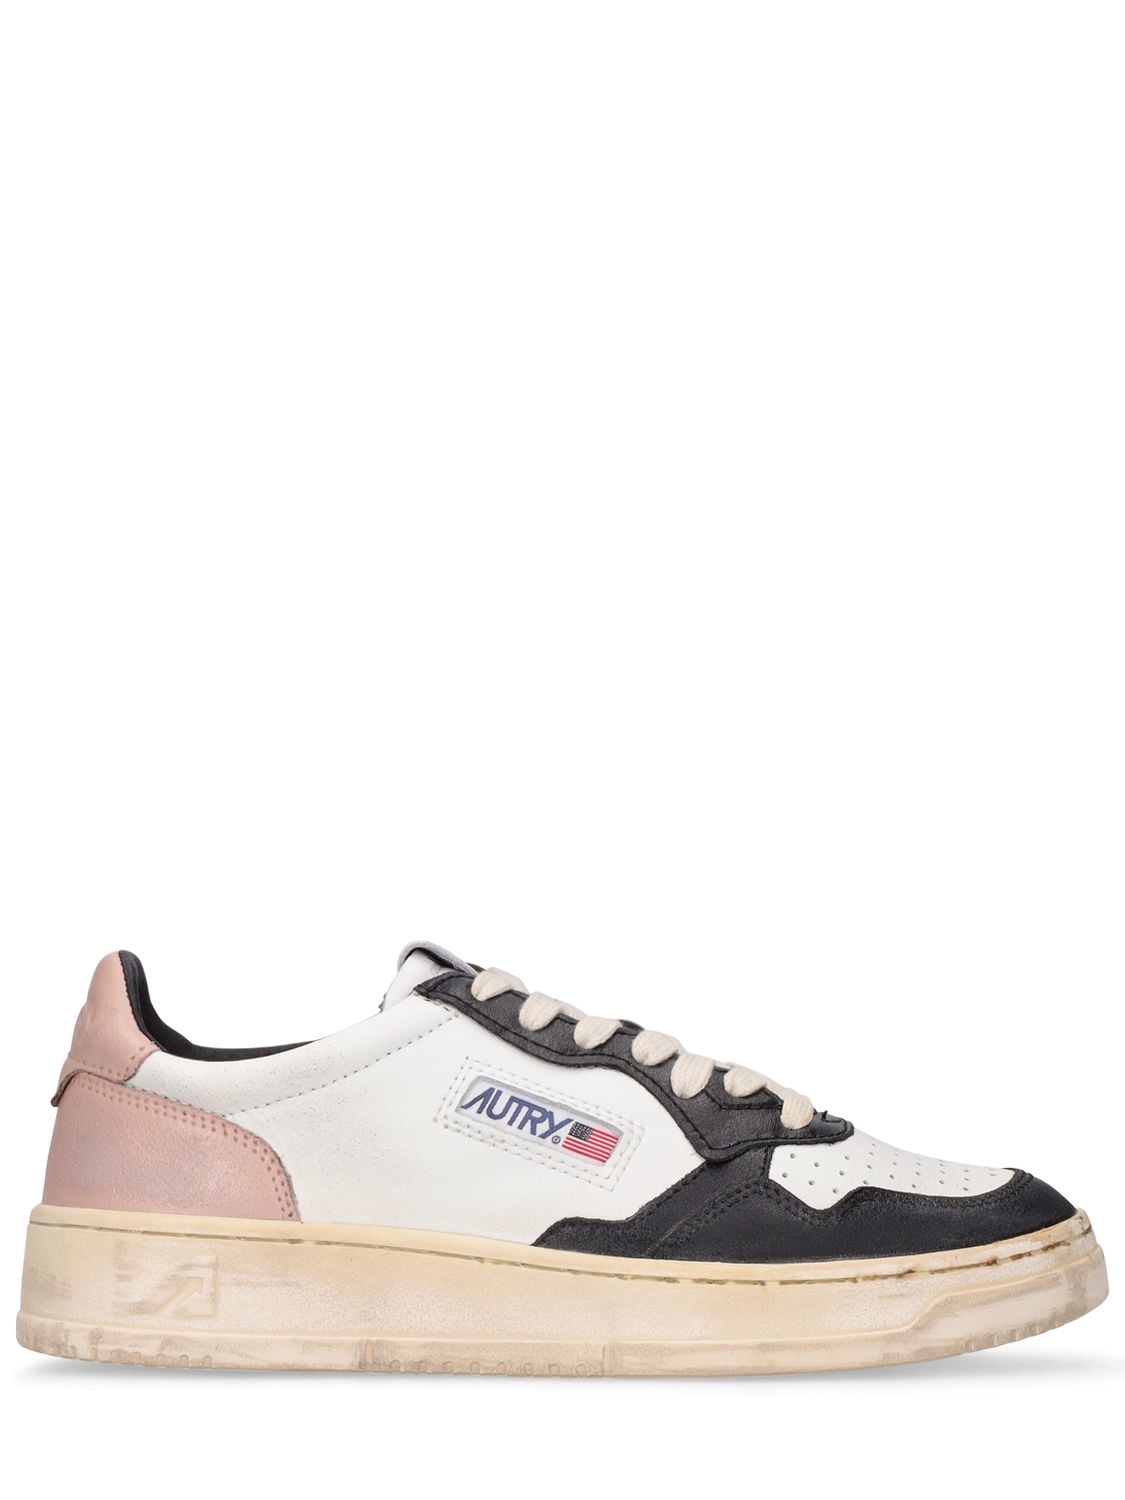 Autry Medalist Low Super Vintage Sneakers In White | ModeSens